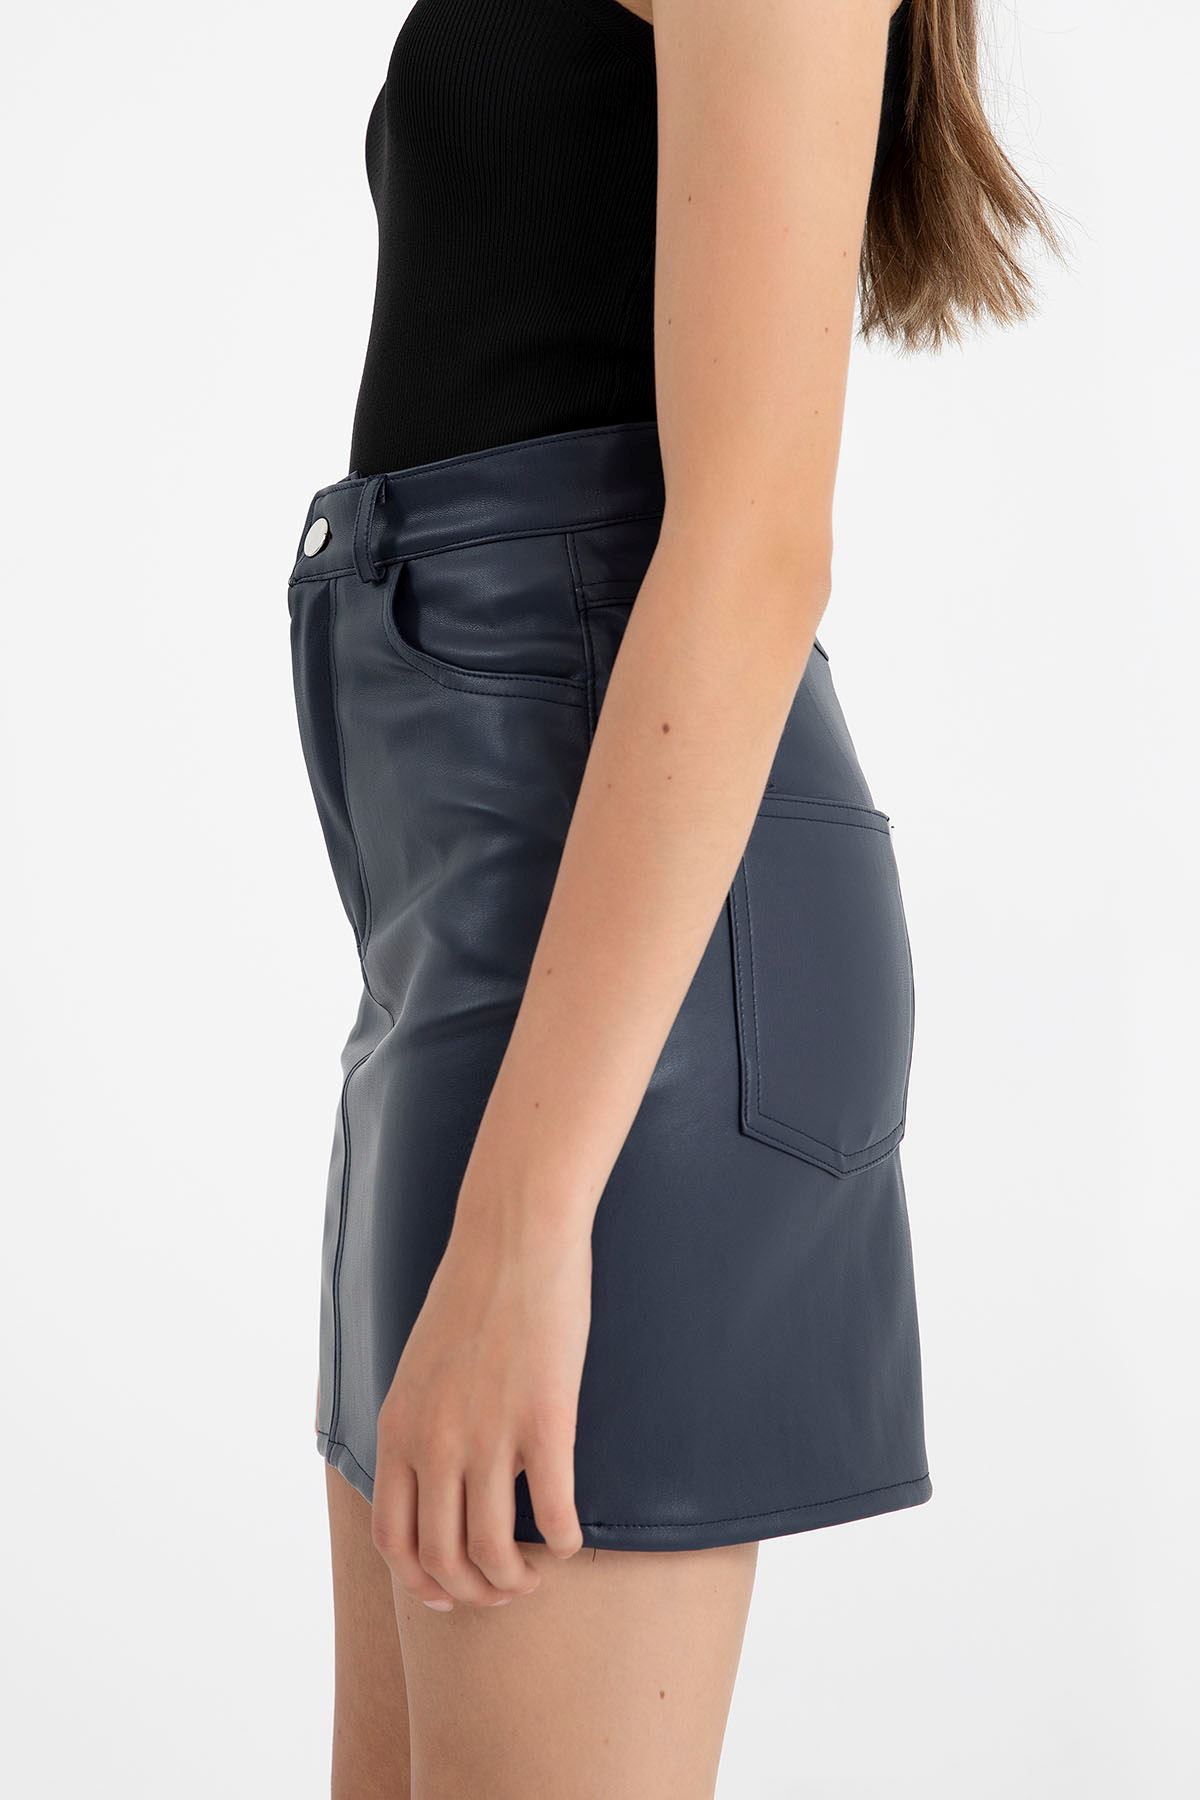 Leather Fabric Tight Fit Midi Skirt - Navy Blue 